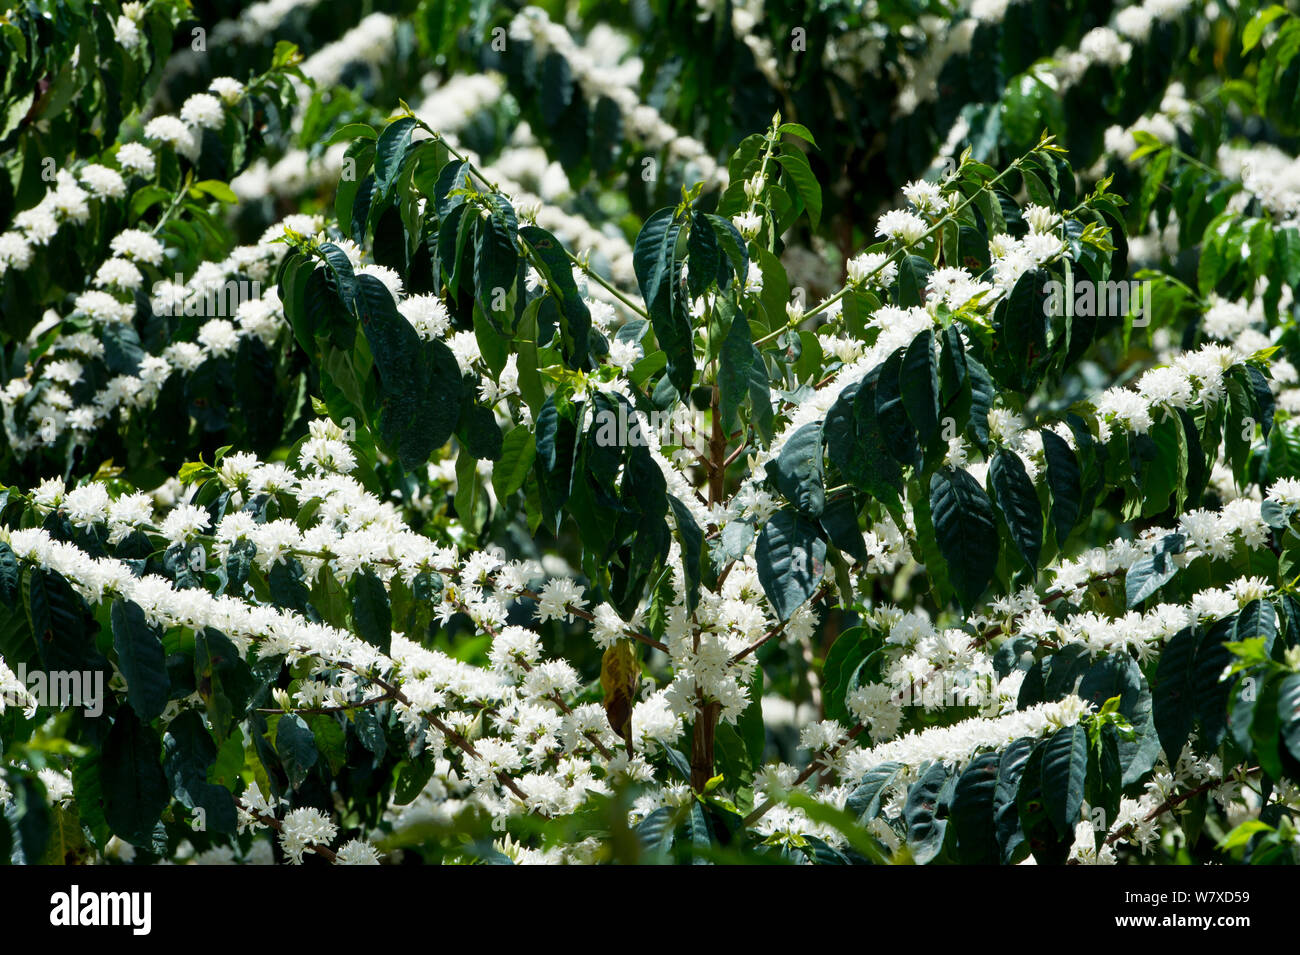 Coffee (Coffea arabica) shrubs in bud and flower. Commercial coffee farm, Tanzania, East Africa. Stock Photo